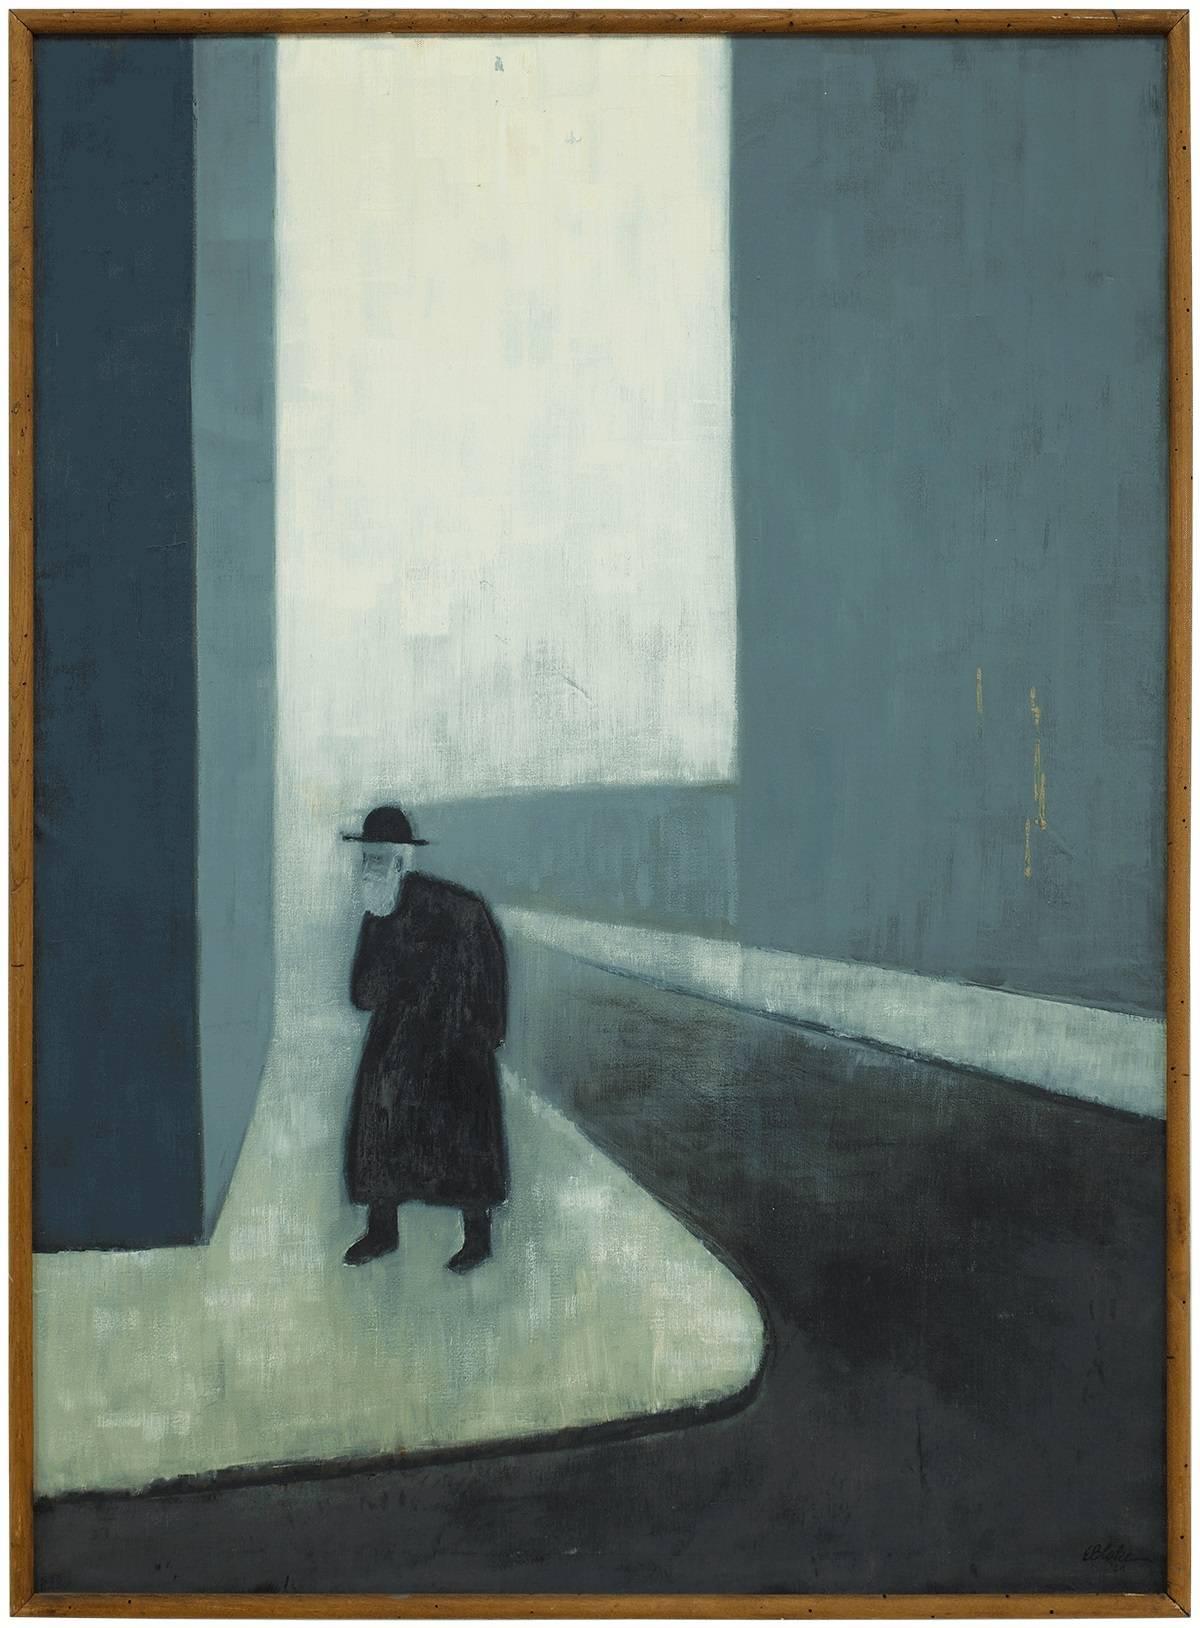 Unknown Figurative Painting - LARGE MODERNIST JUDAICA Oil Painting (RABBI WALKING THROUGH THE CITY)